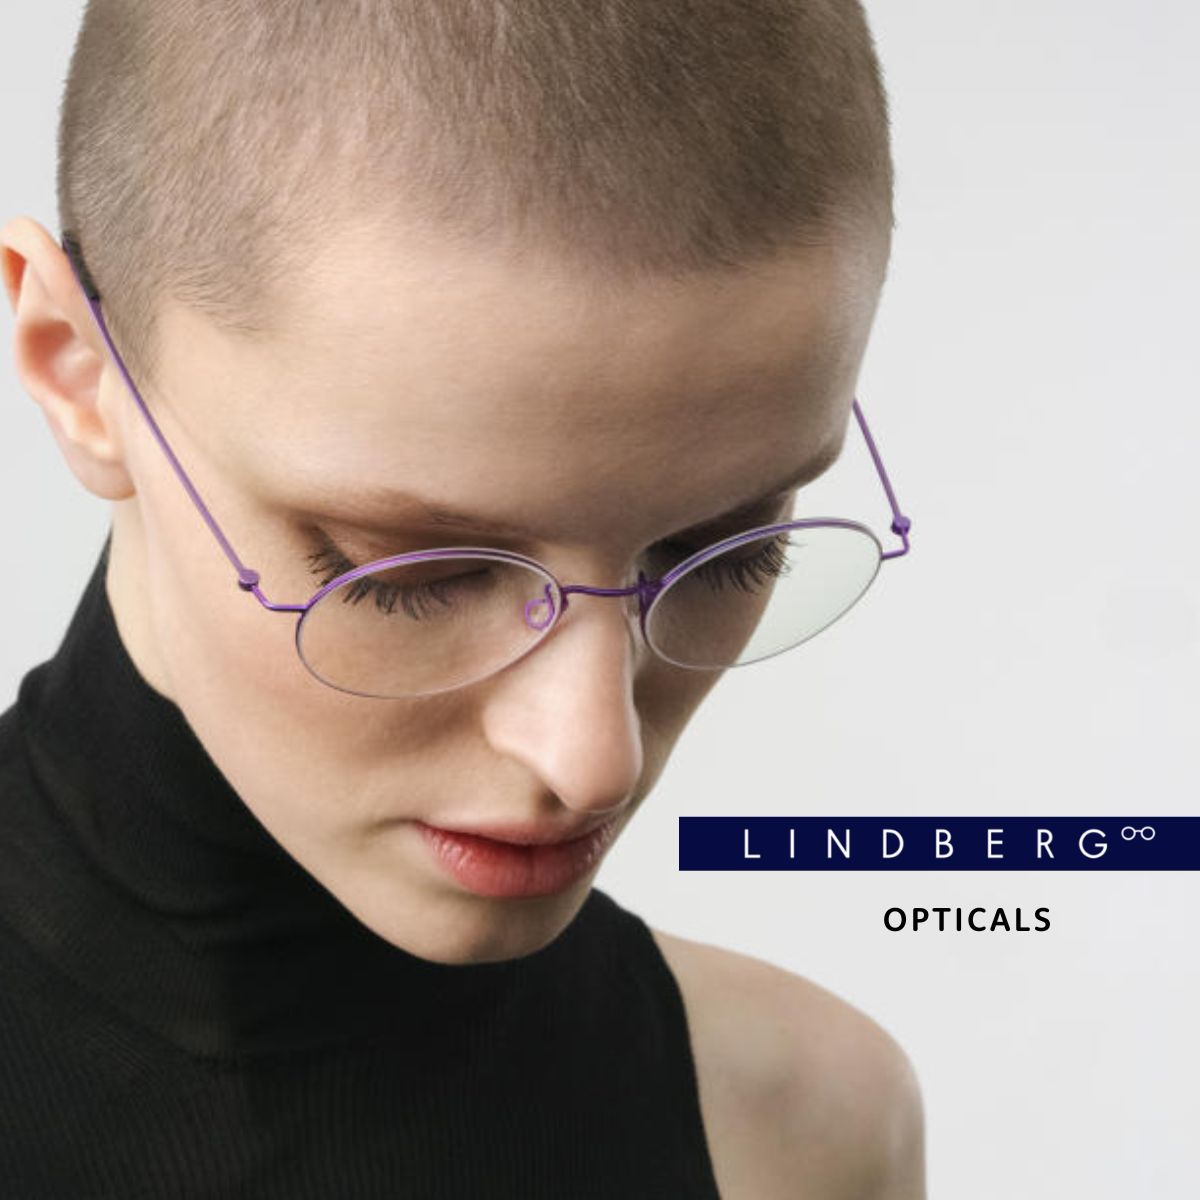 "Elevate your style with LINDBERG eyeglasses and optical frames from Optorium, offering customizable and high-quality options for men and women."